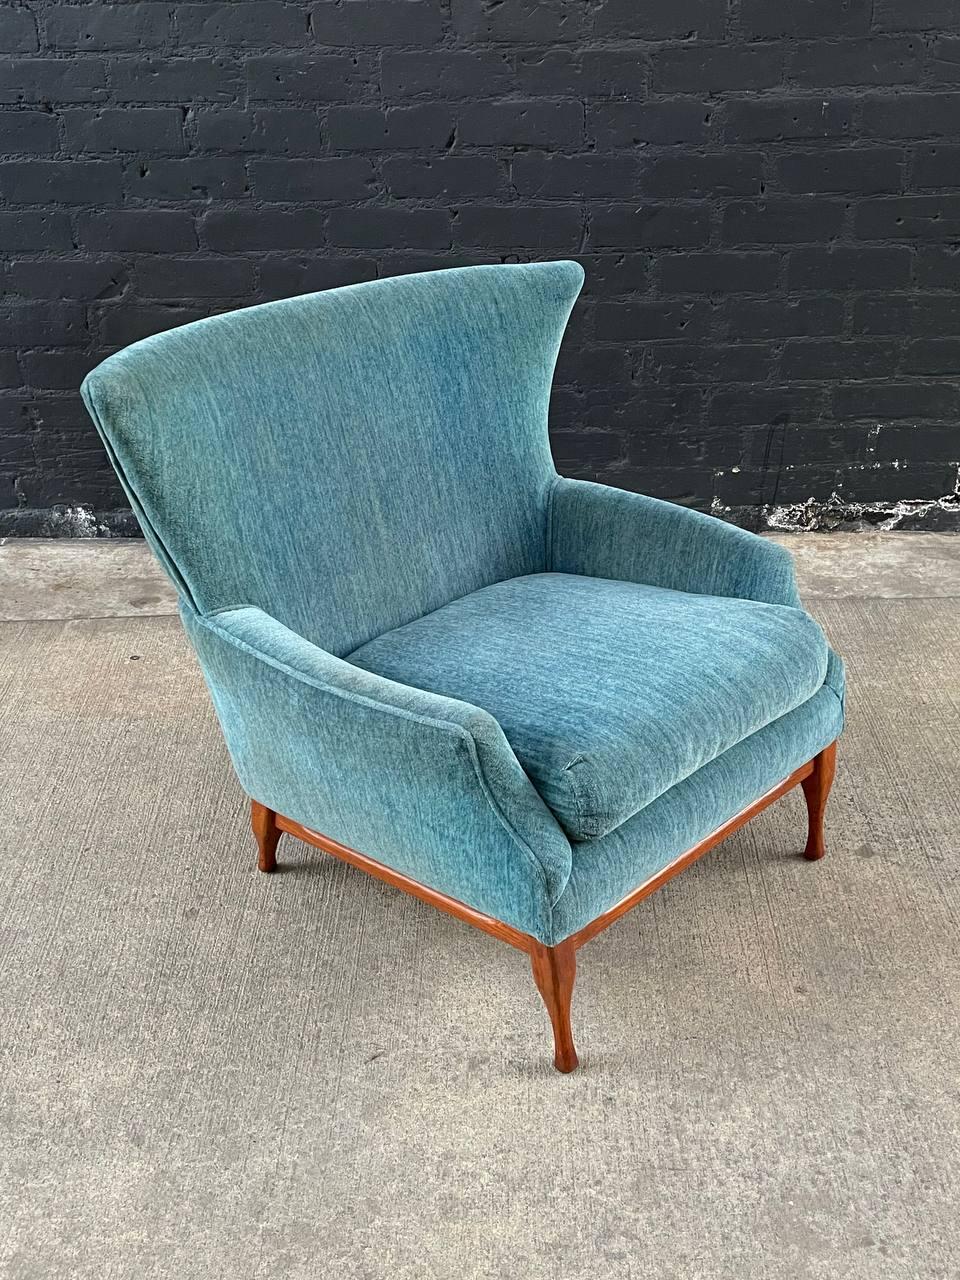 American Mid-Century Modern Wing Lounge Chair with Walnut Base